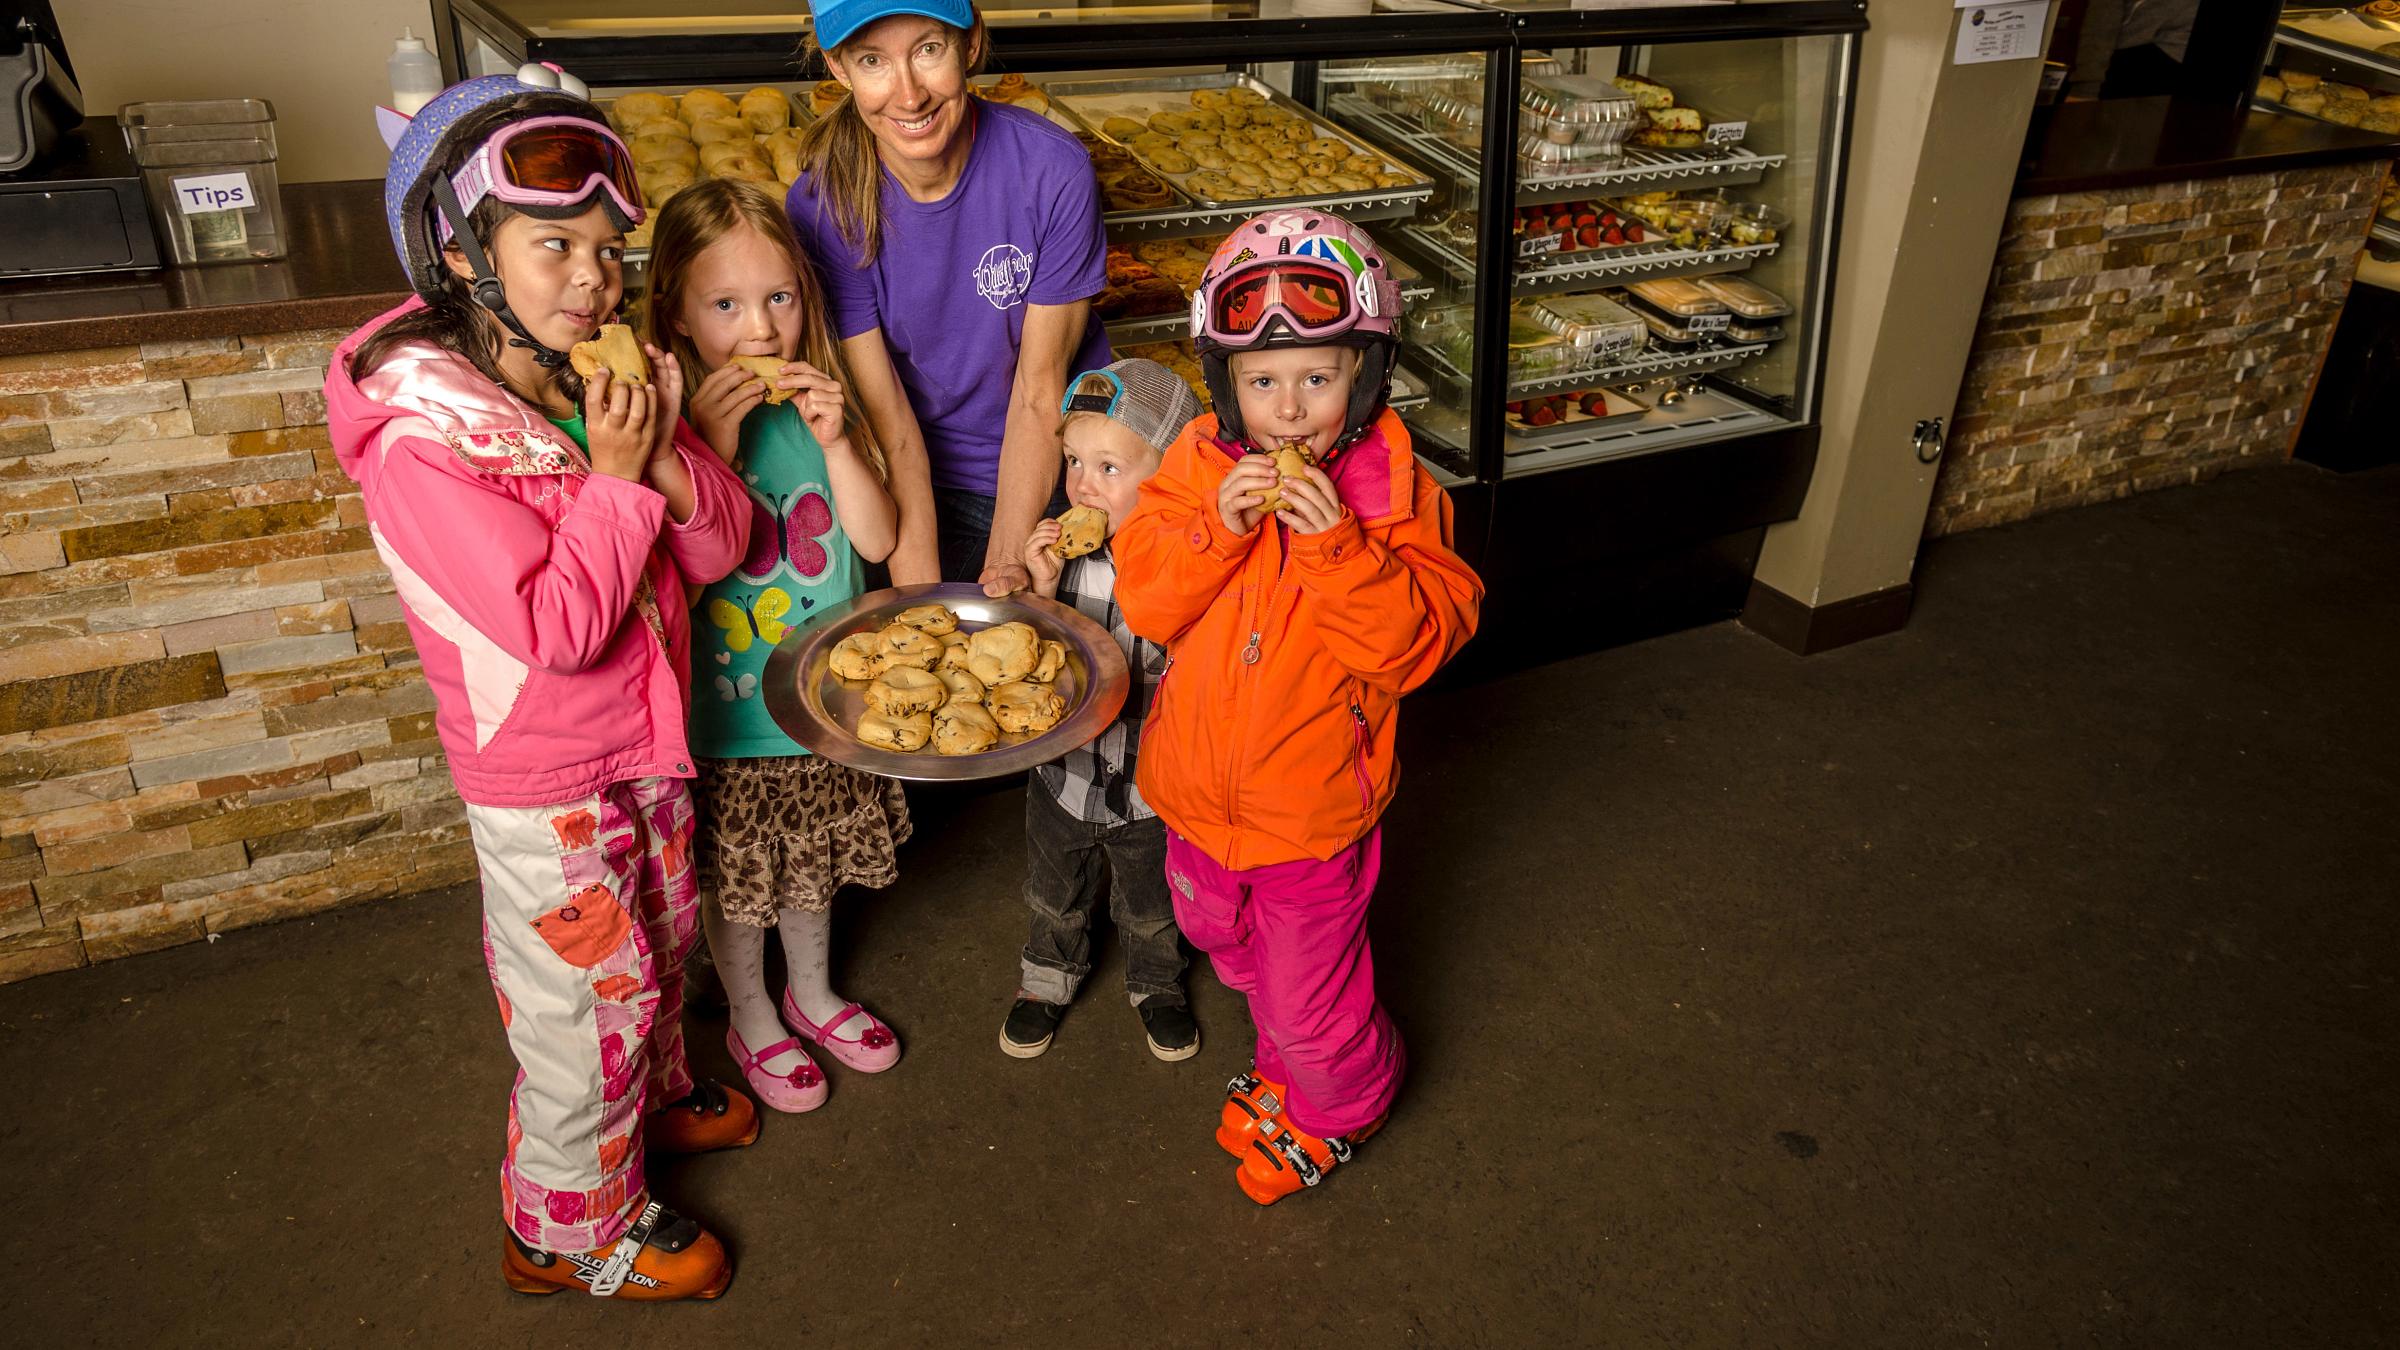 Wildflour Baking Company at Squaw Valley, Ski Teams Kids and Wildflour Baking Owner with Cookies